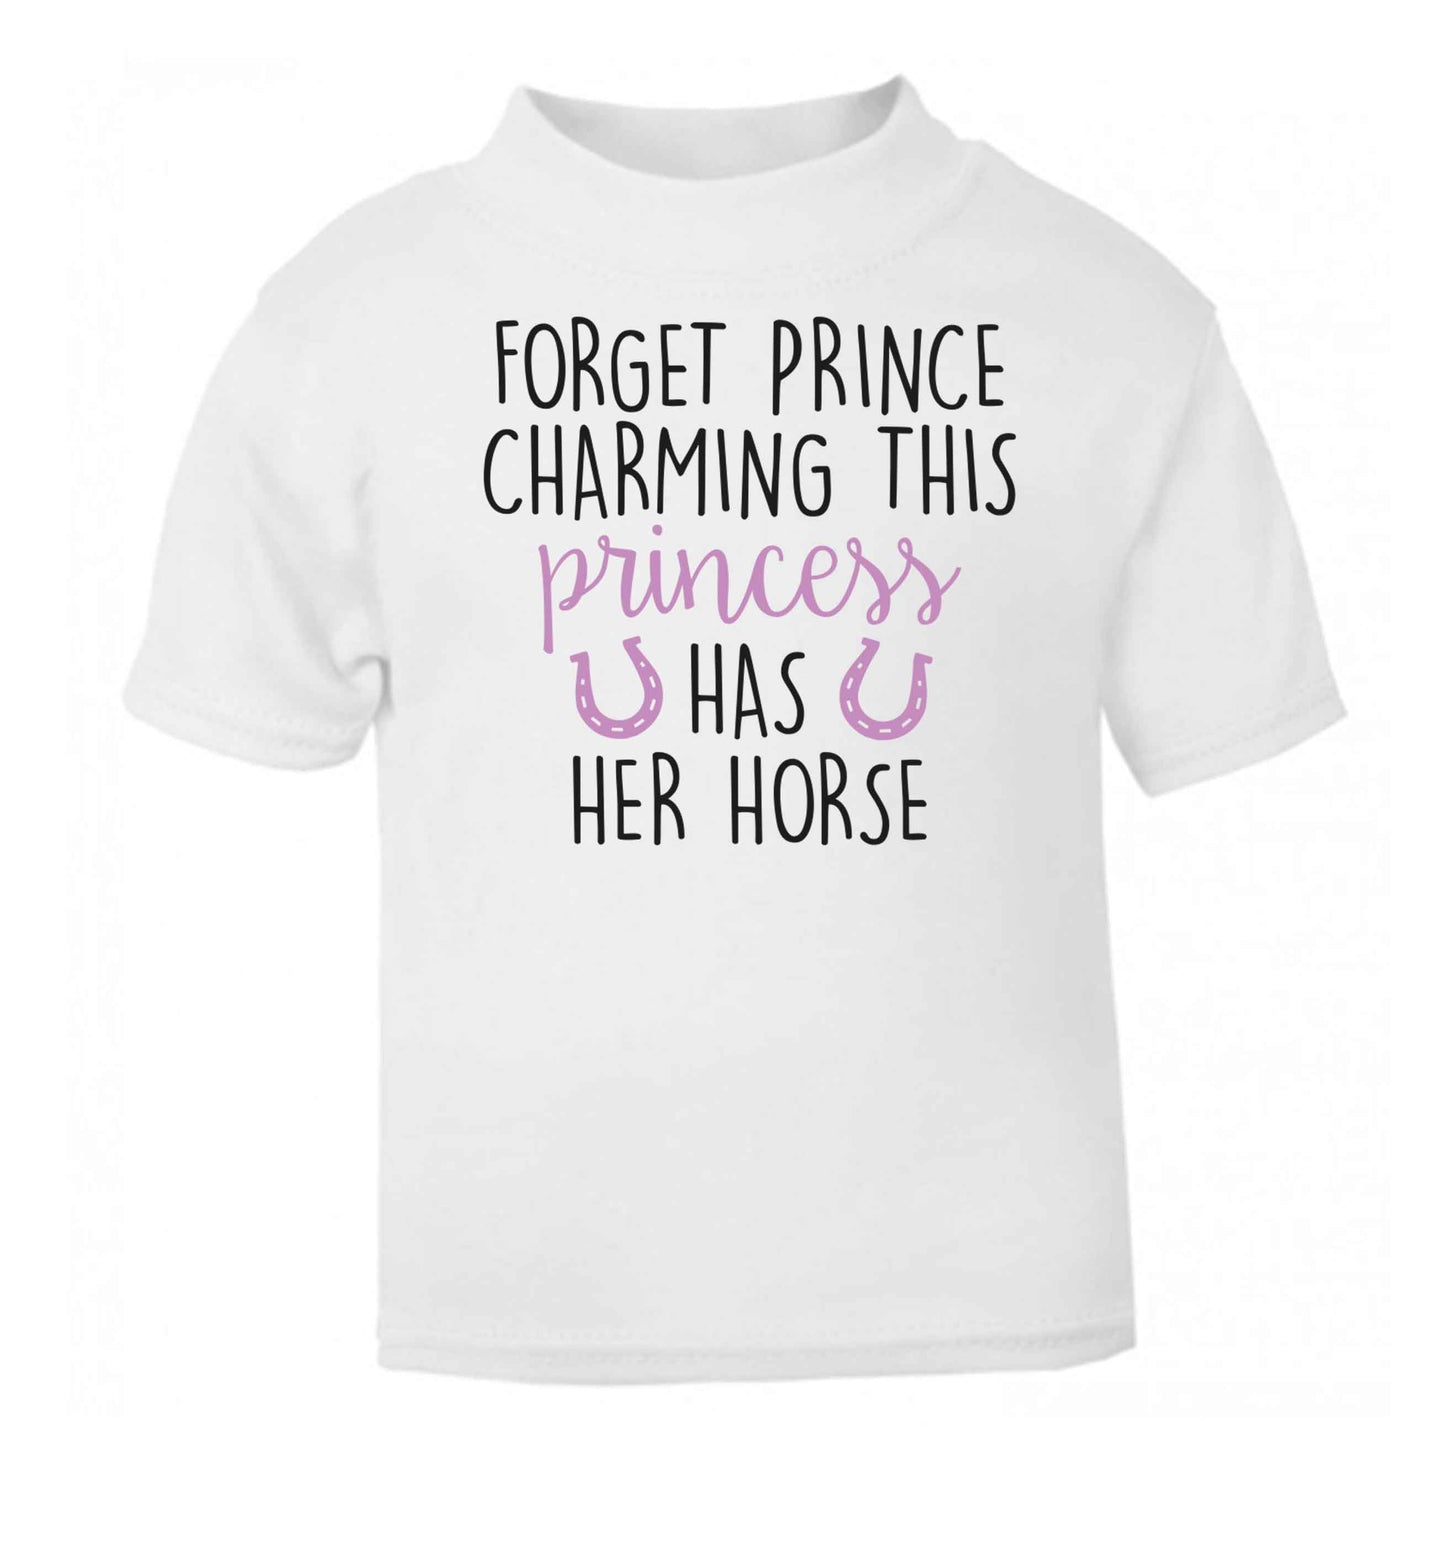 Forget prince charming this princess has her horse white baby toddler Tshirt 2 Years